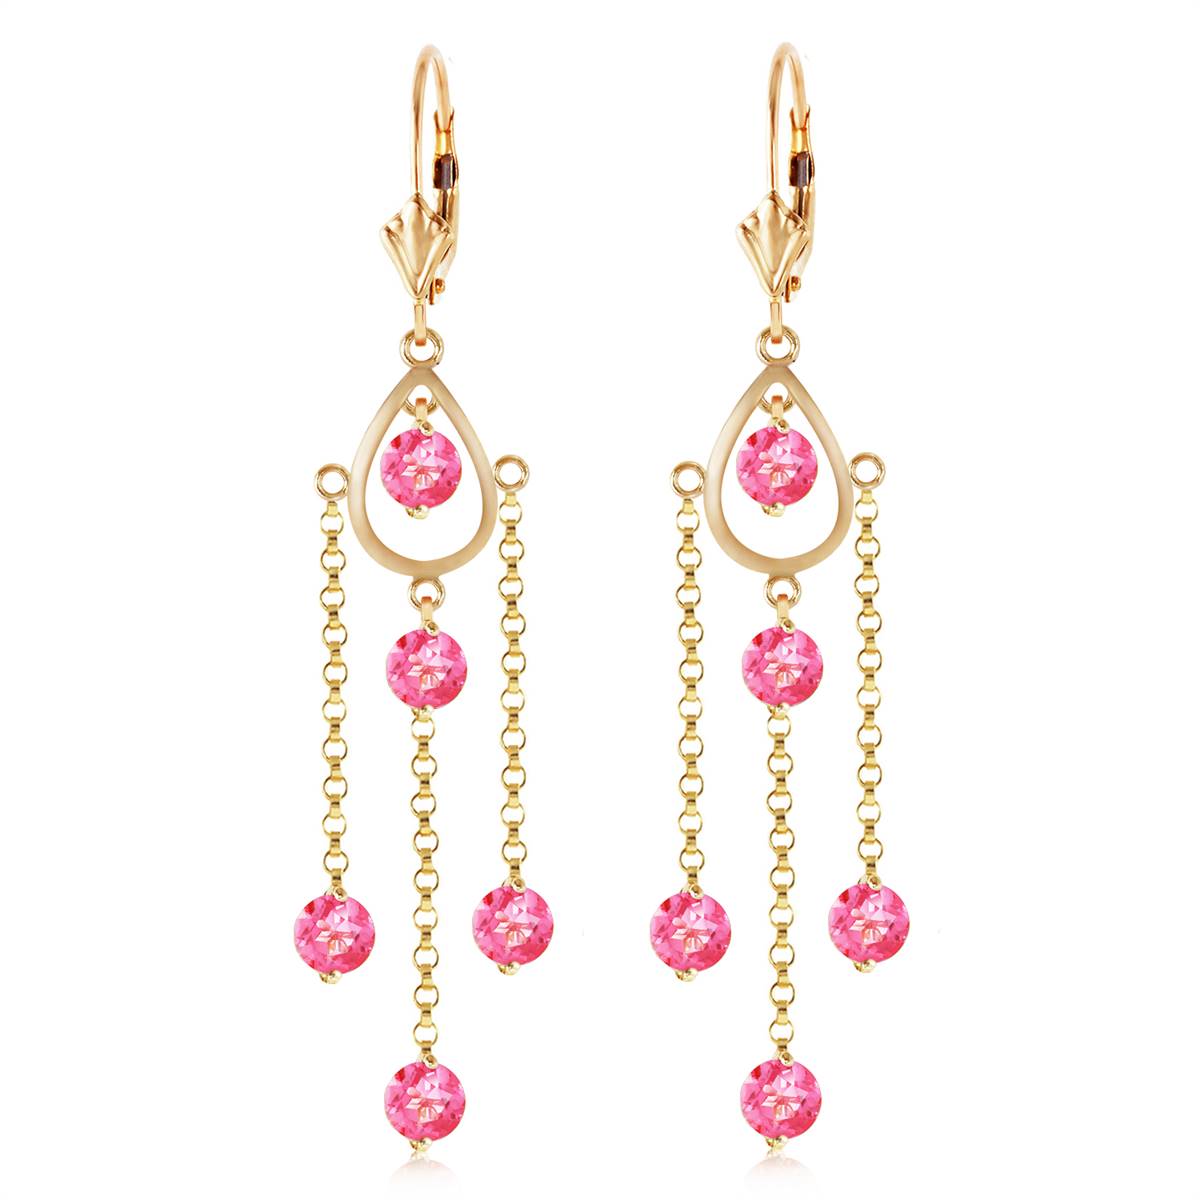 3 Carat 14K Solid Yellow Gold Gilded Age Pink Topaz Earrings